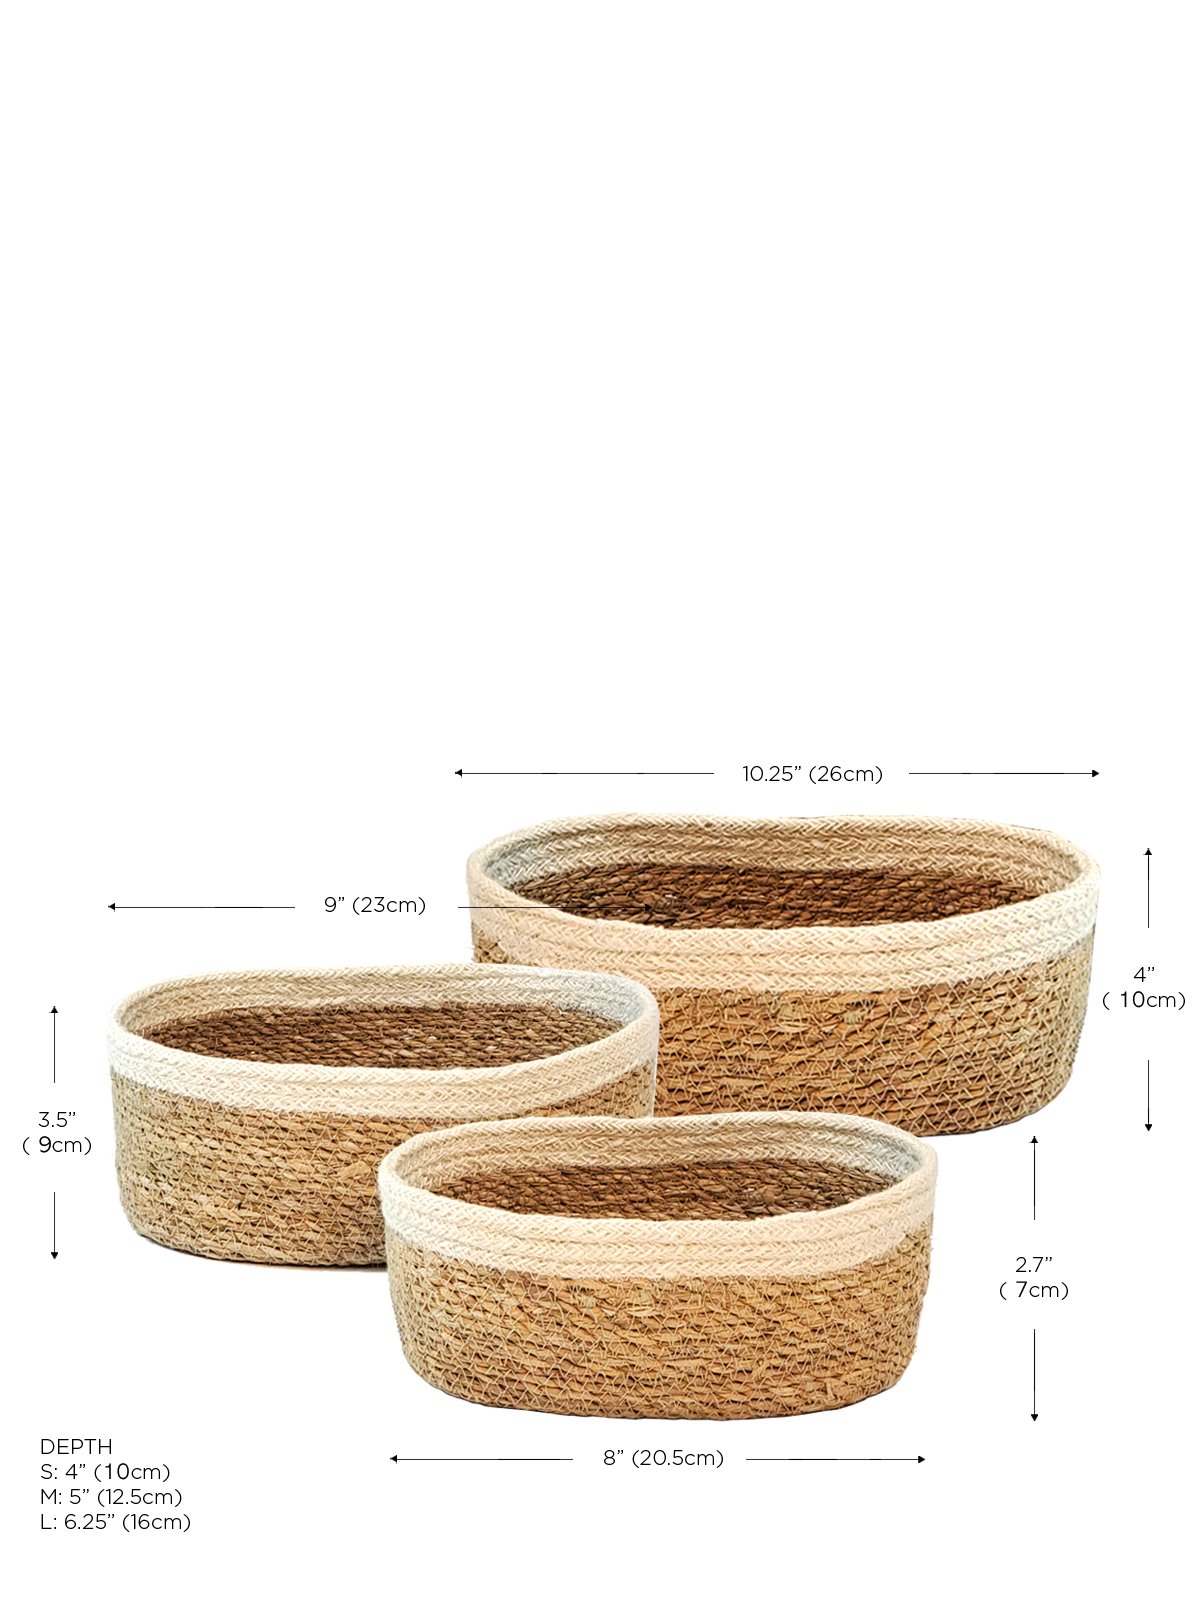 oval seagrass stroage baskets with measurements 